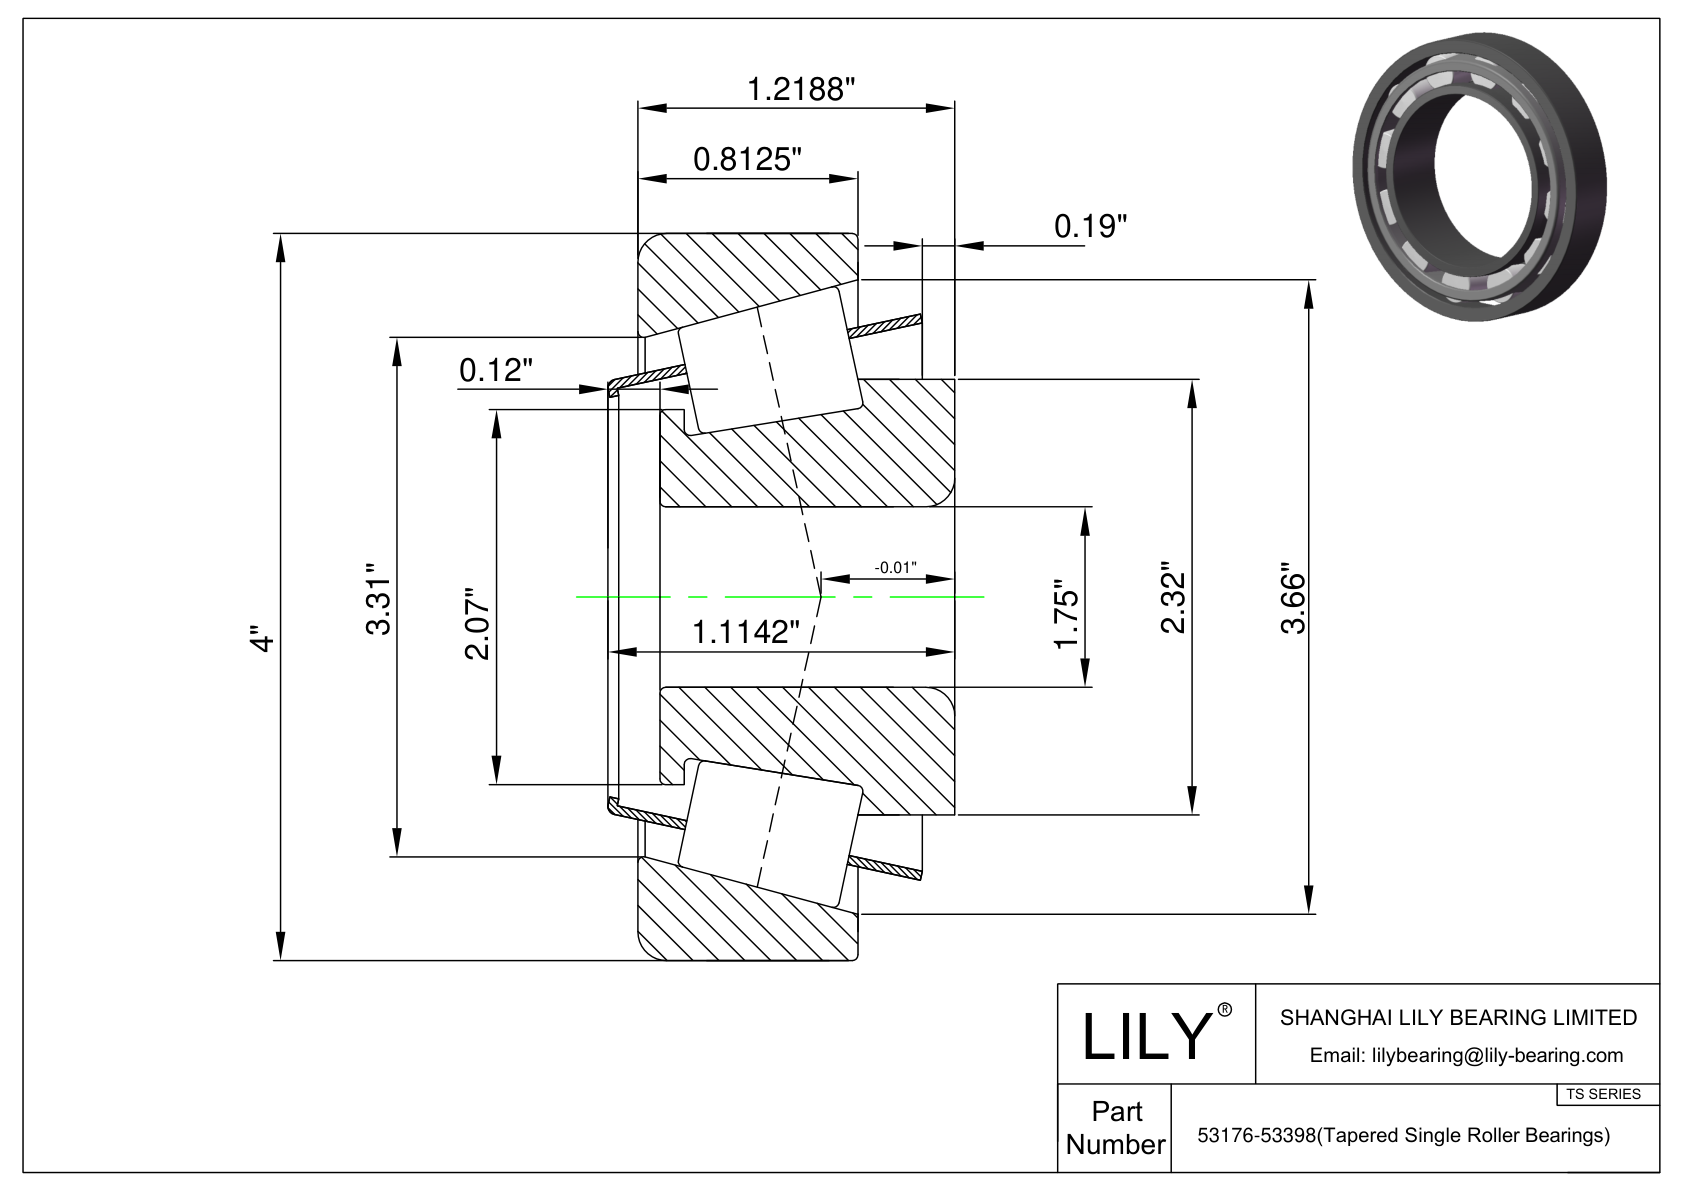 53176-53398 TS (Tapered Single Roller Bearings) (Imperial) cad drawing